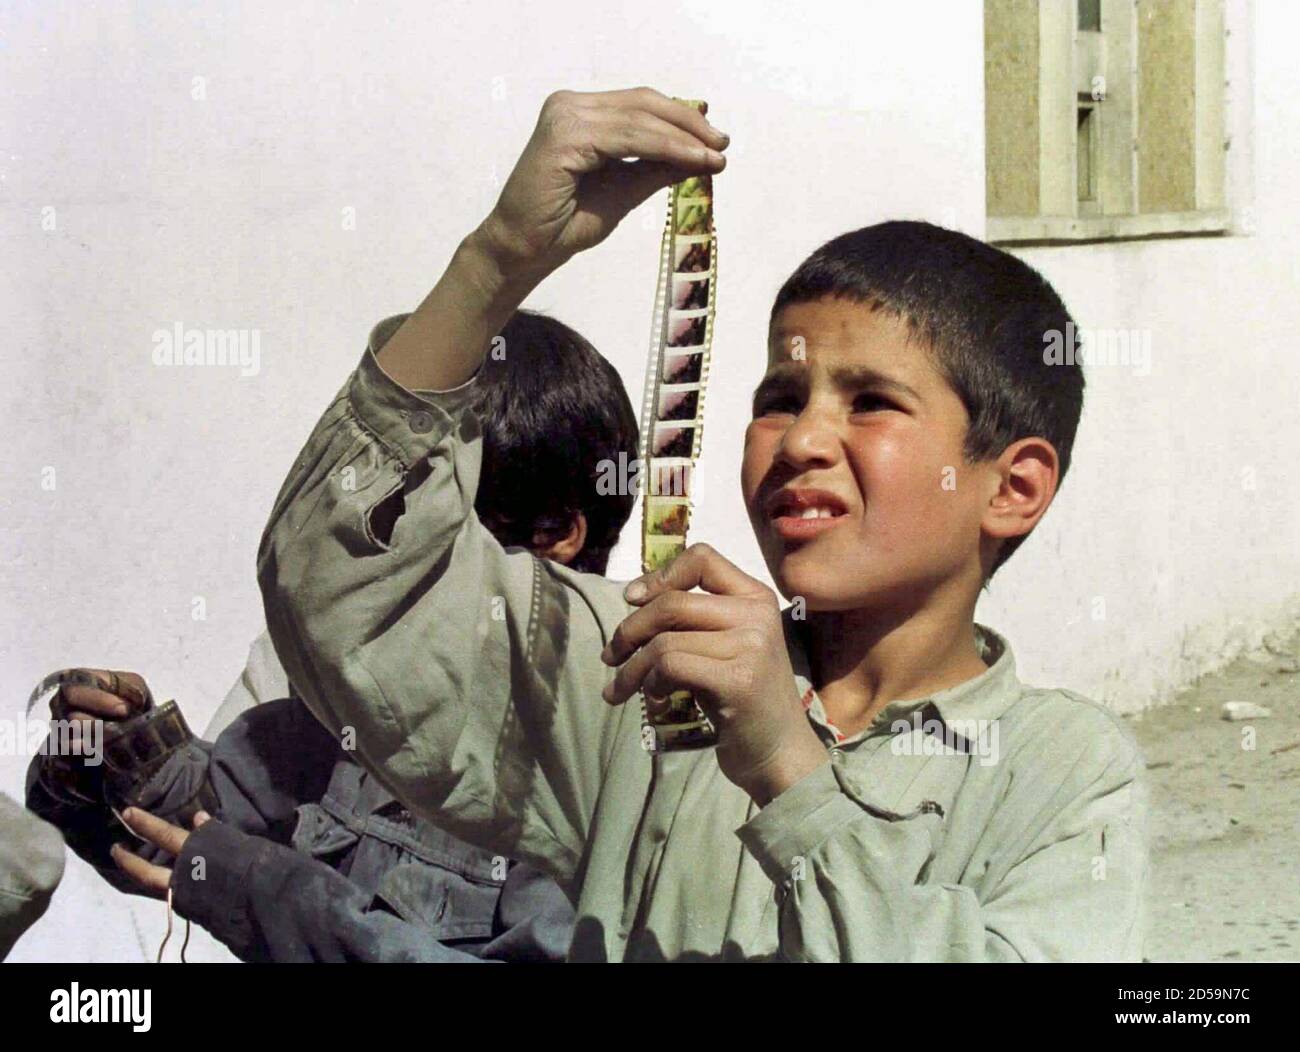 An Afghan boy examines a strip of movie film snatched from the flames of a bonfire set by the purist Islamic Taliban in front of Kabul's Zaynab cinema. The militia has banned music, cinema and television and imposed Islam's stern Shariah law on the Afghan capital. Photo taken 14OCT96. Stock Photo